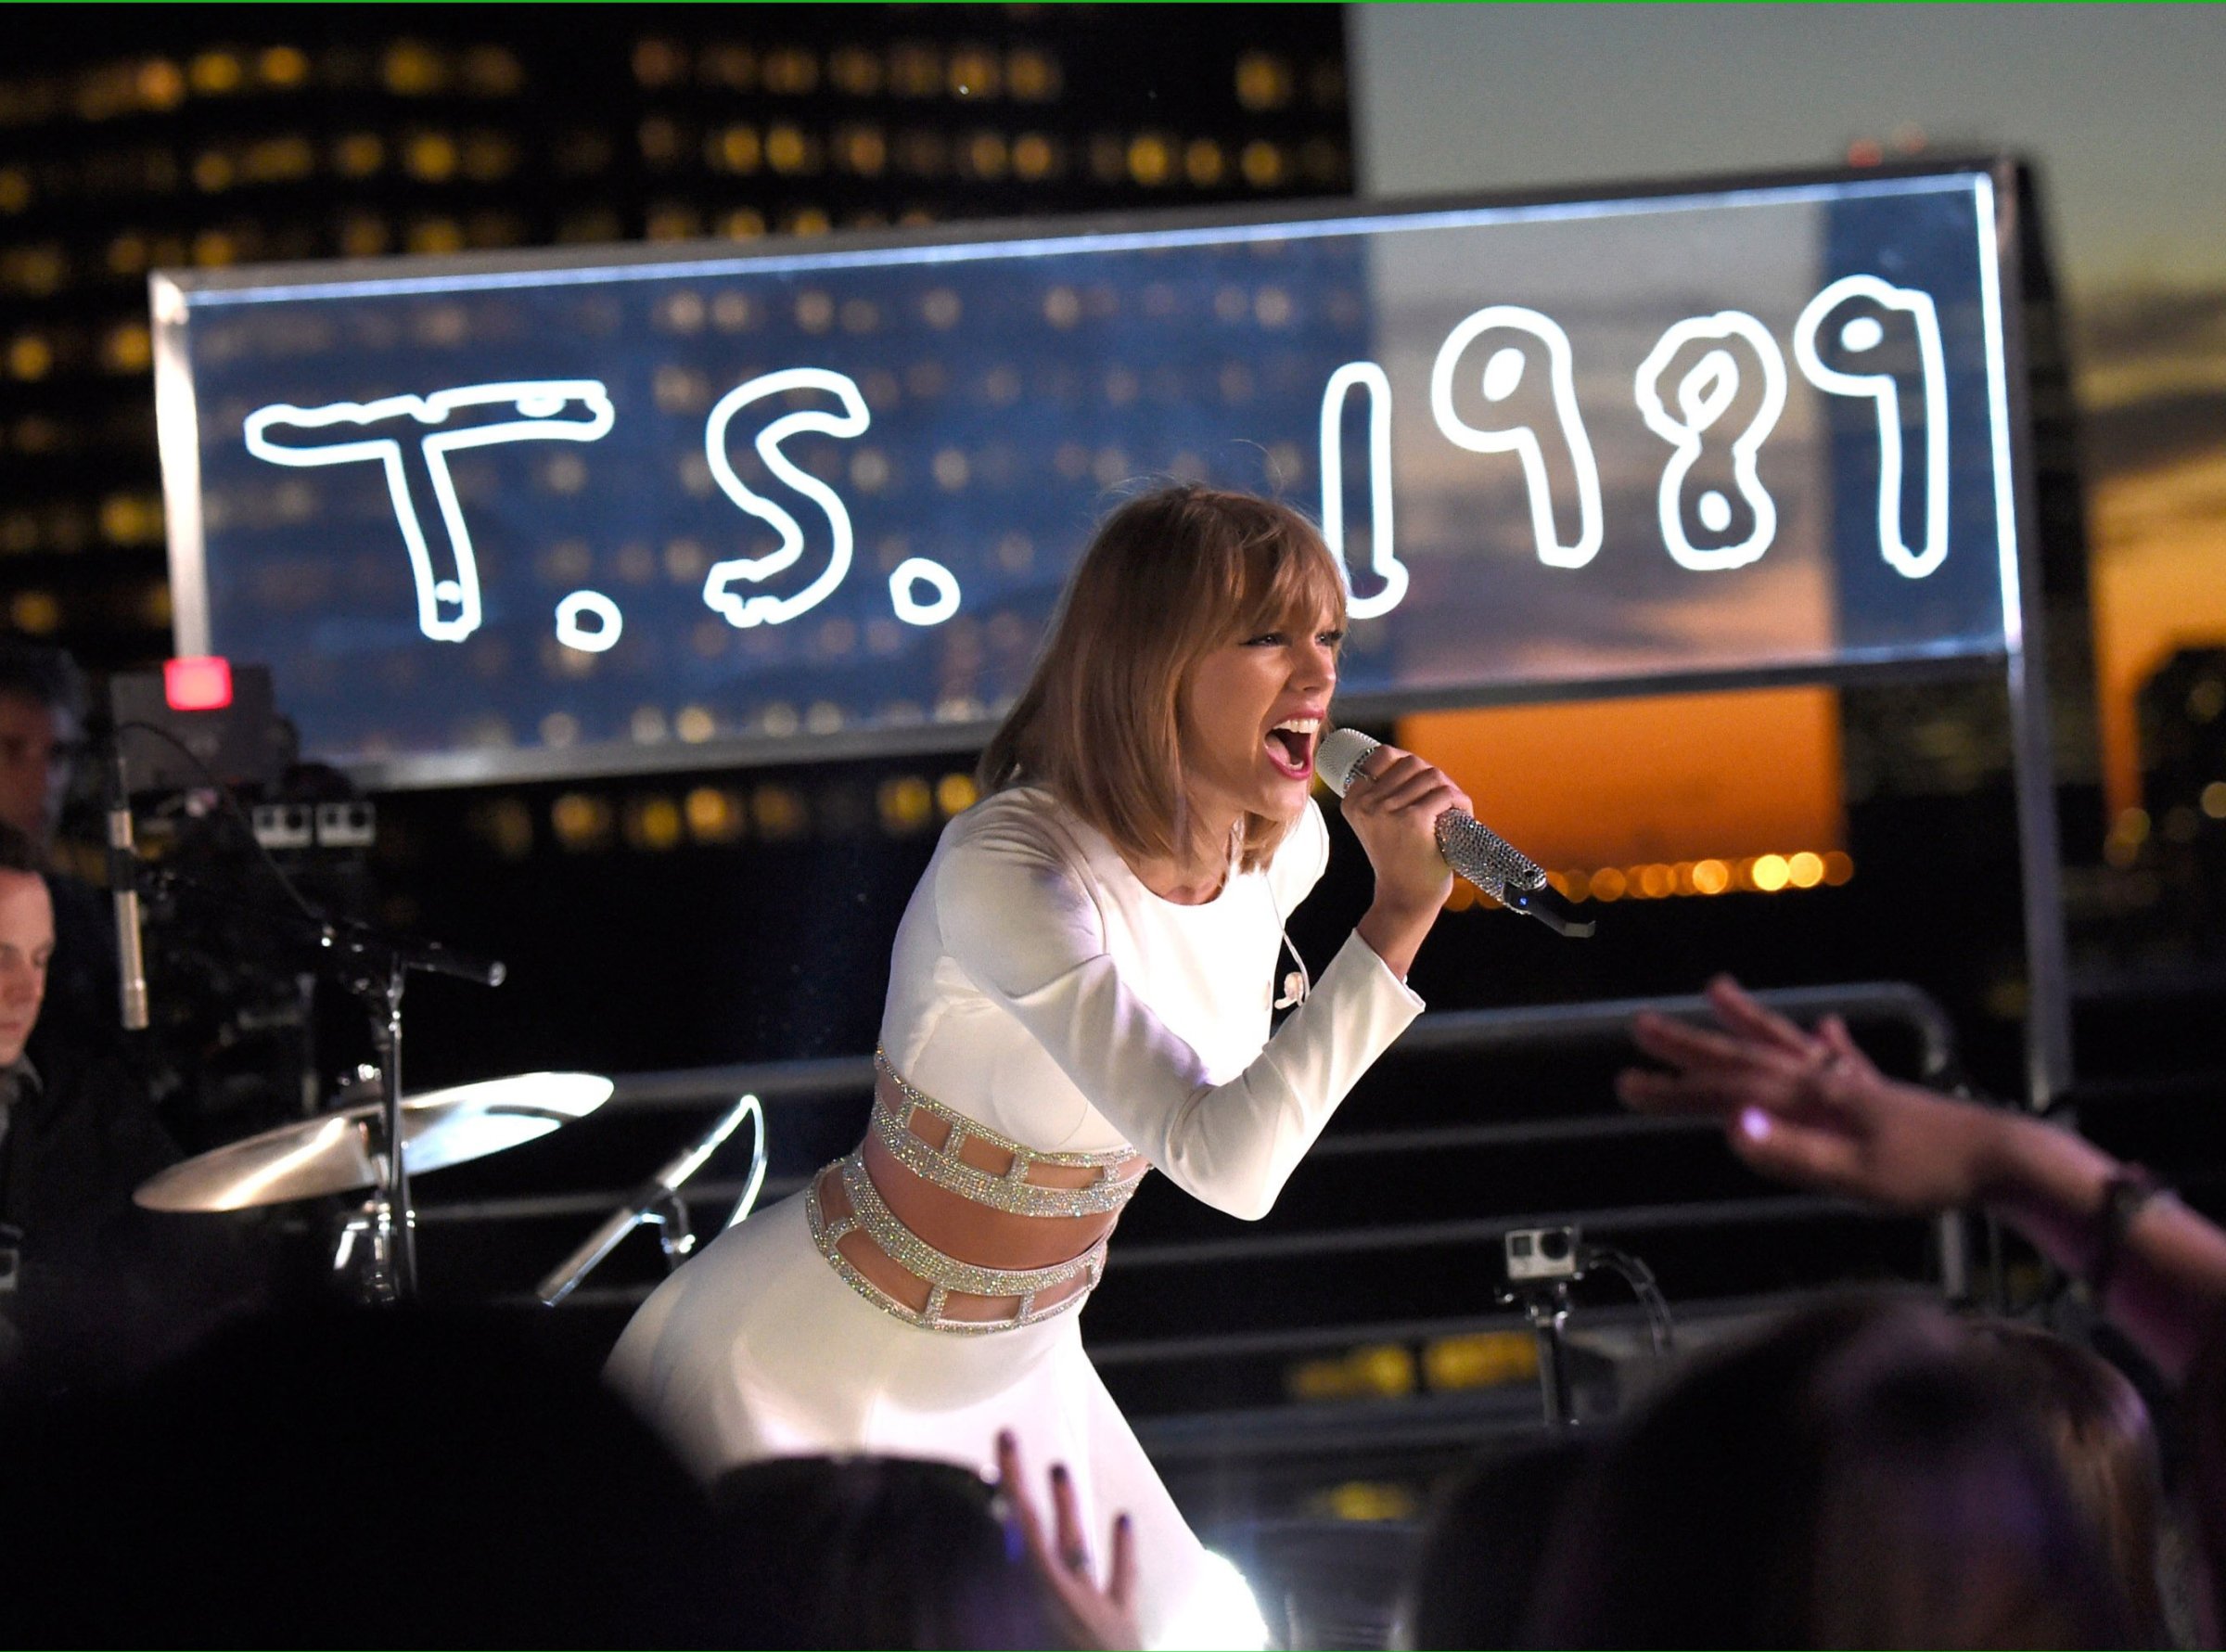 Taylor Swift performs during her 1989 Secret Session with iHeartRadio on Oct. 27, 2014 in New York City.